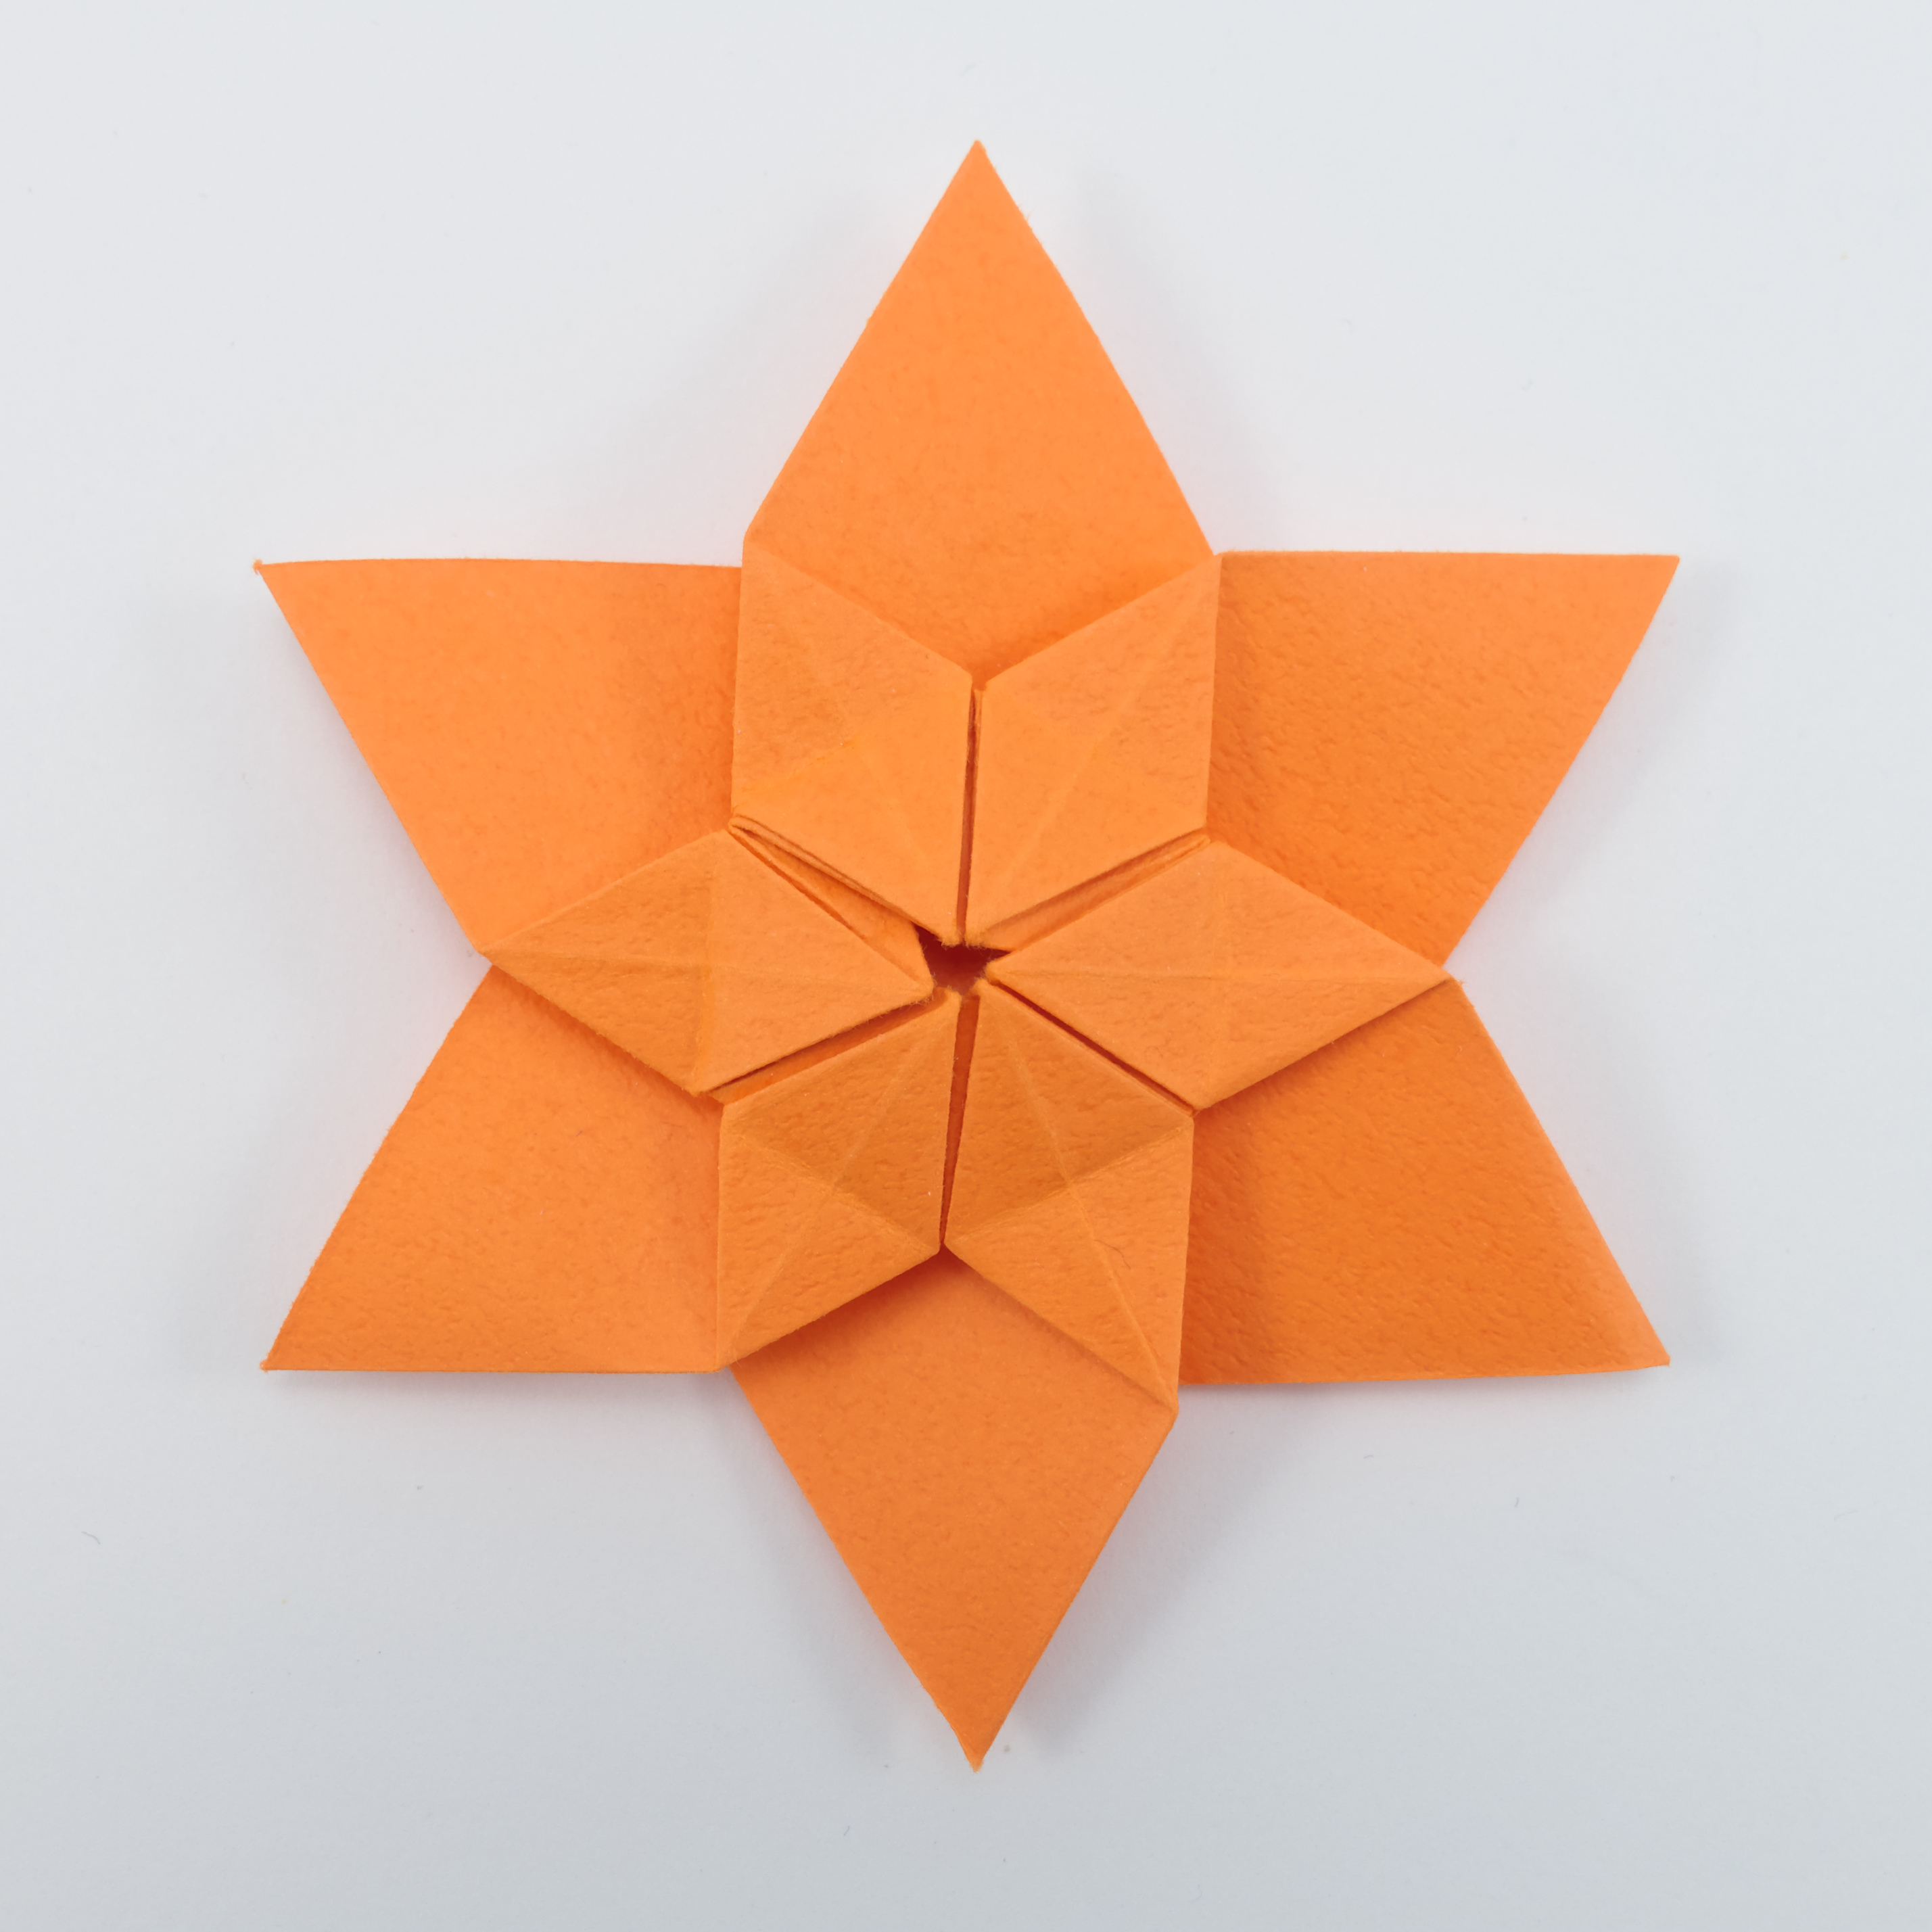 The multi-material 3D printed hexagon-twist origami structure. (A